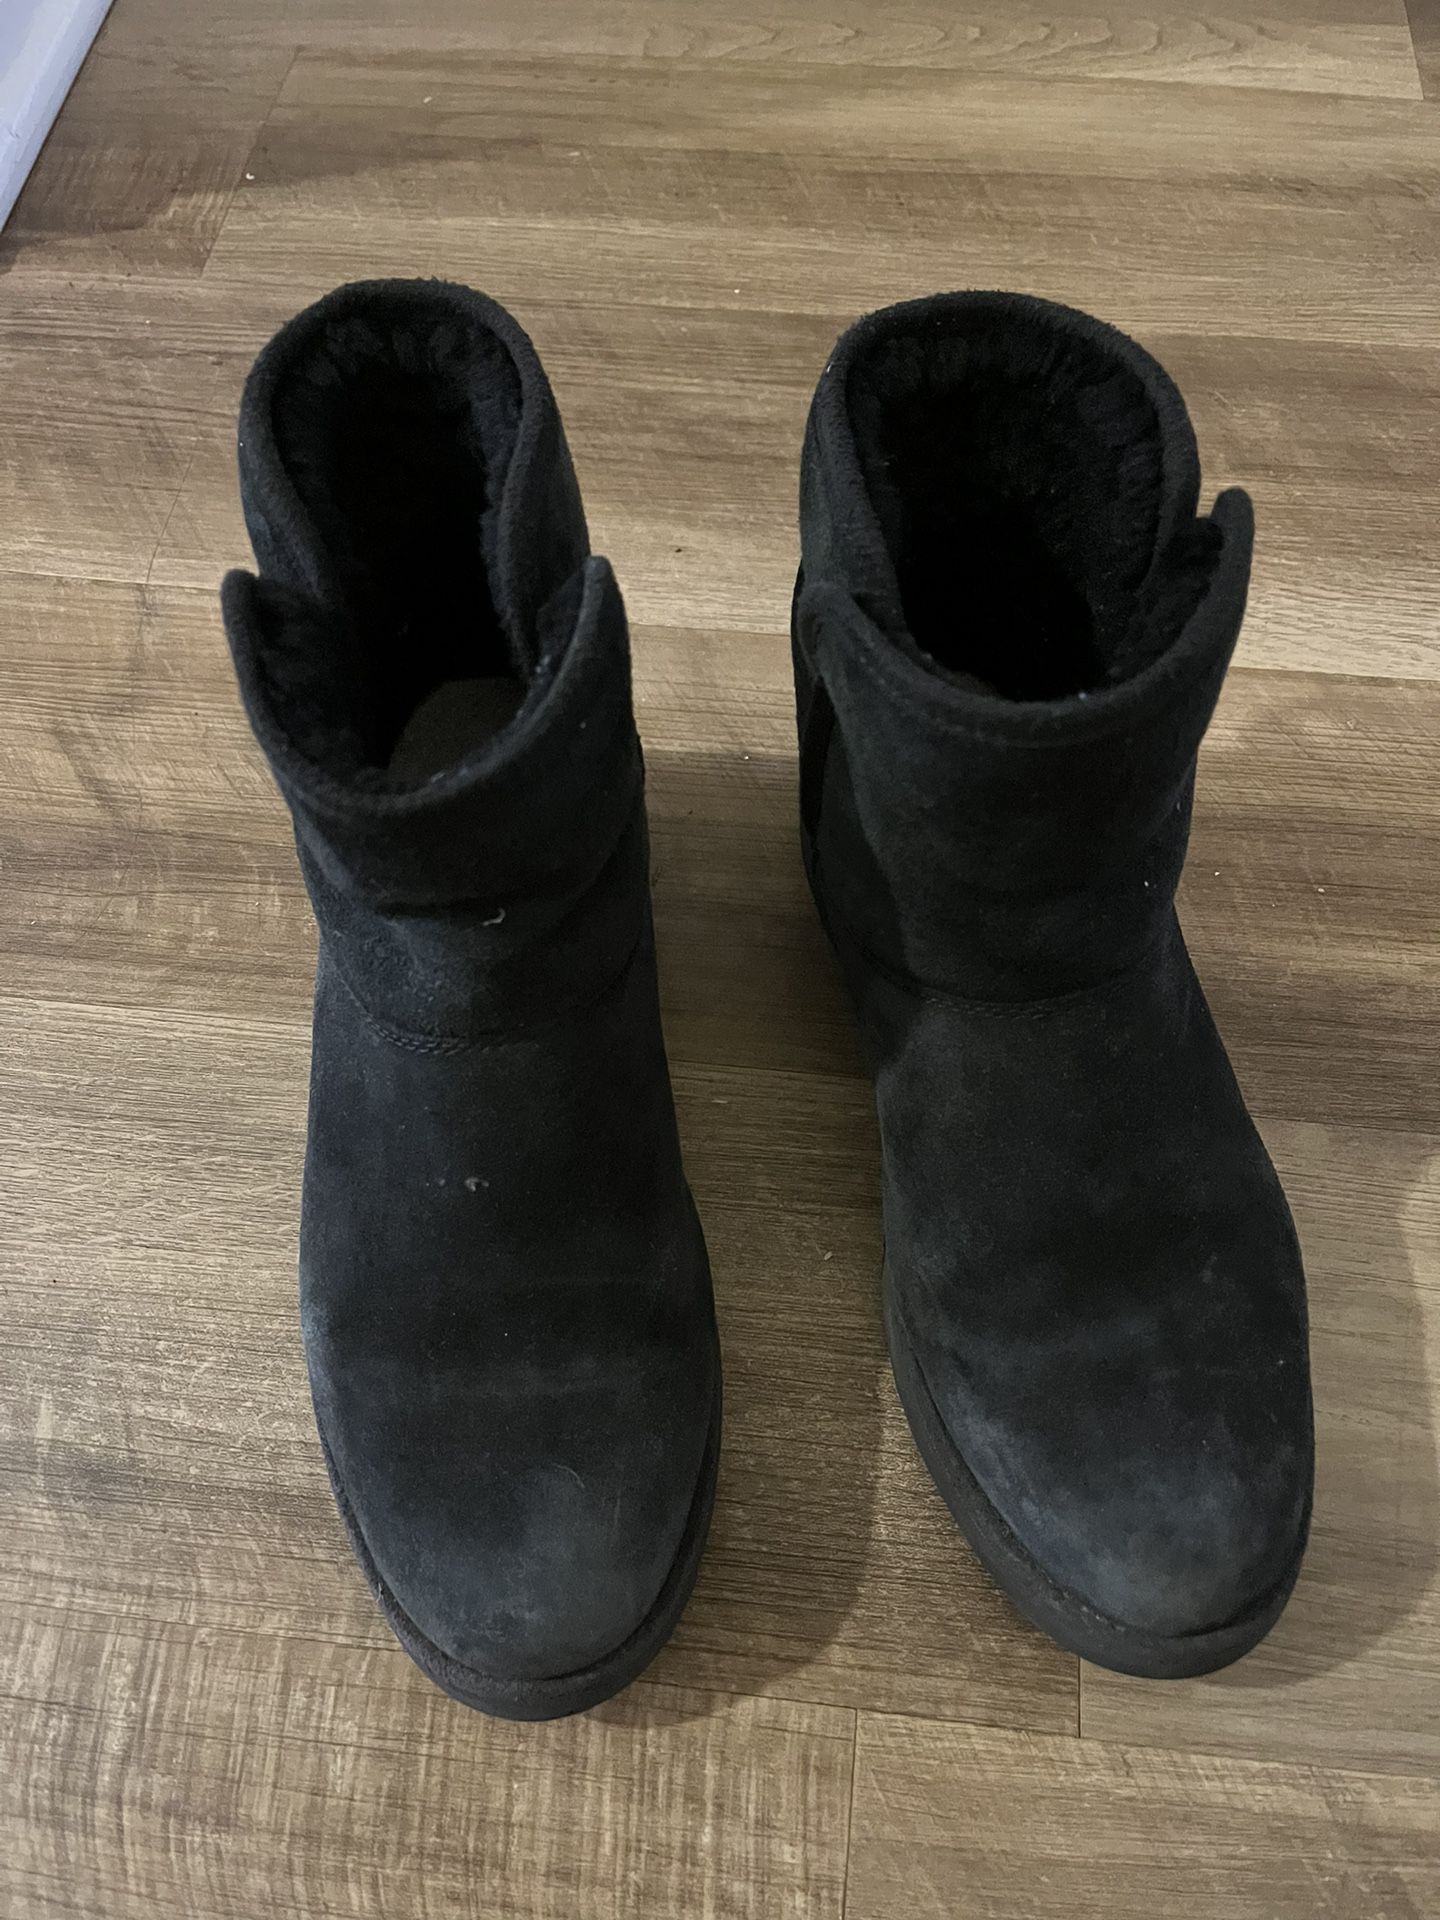 Ugg Women Boots Size 7